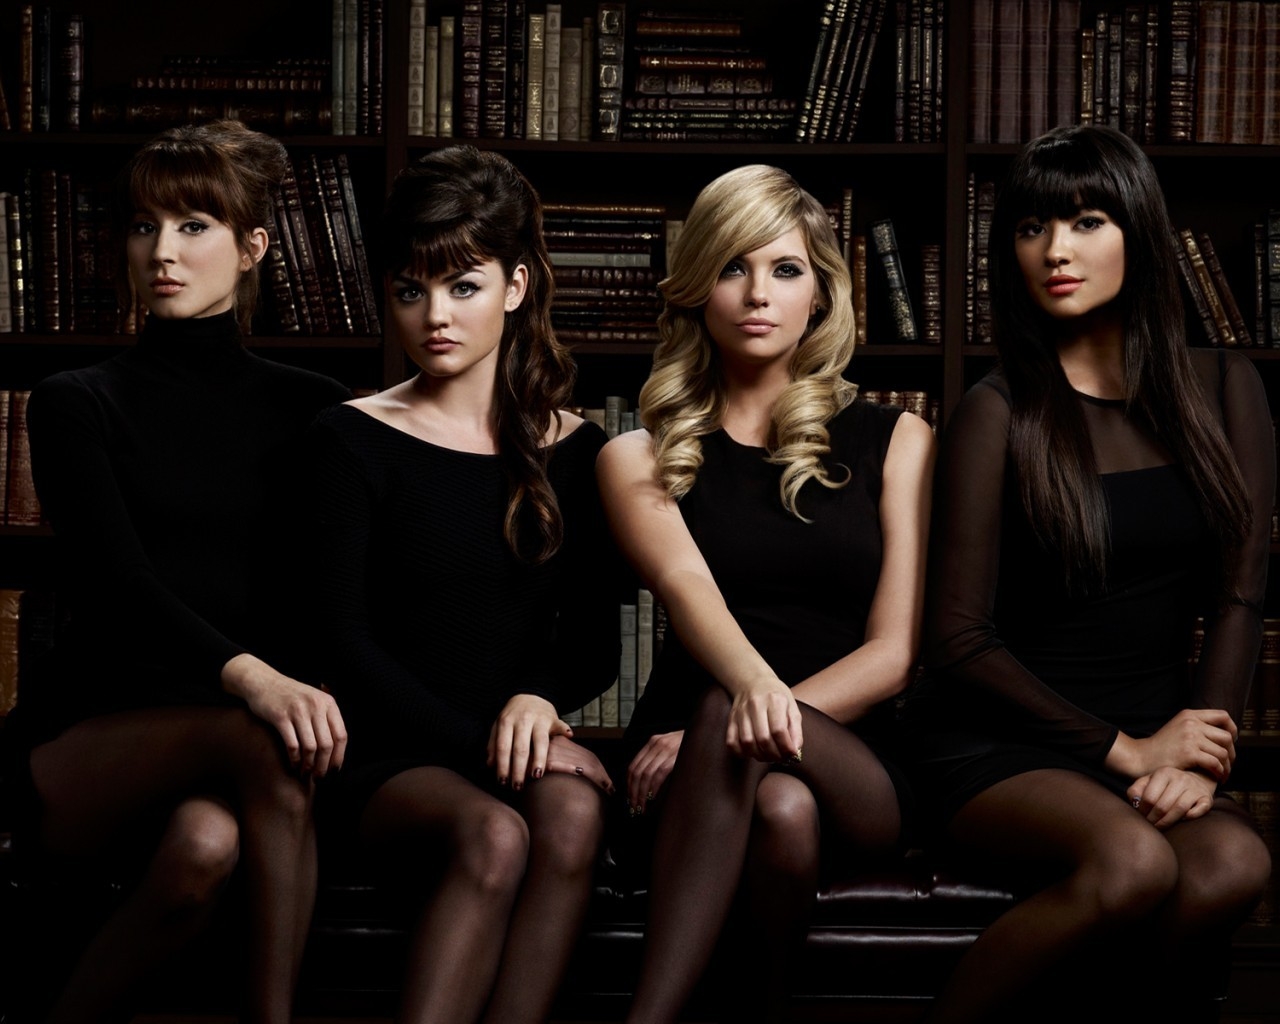 Pretty Little Liars Poster for 1280 x 1024 resolution